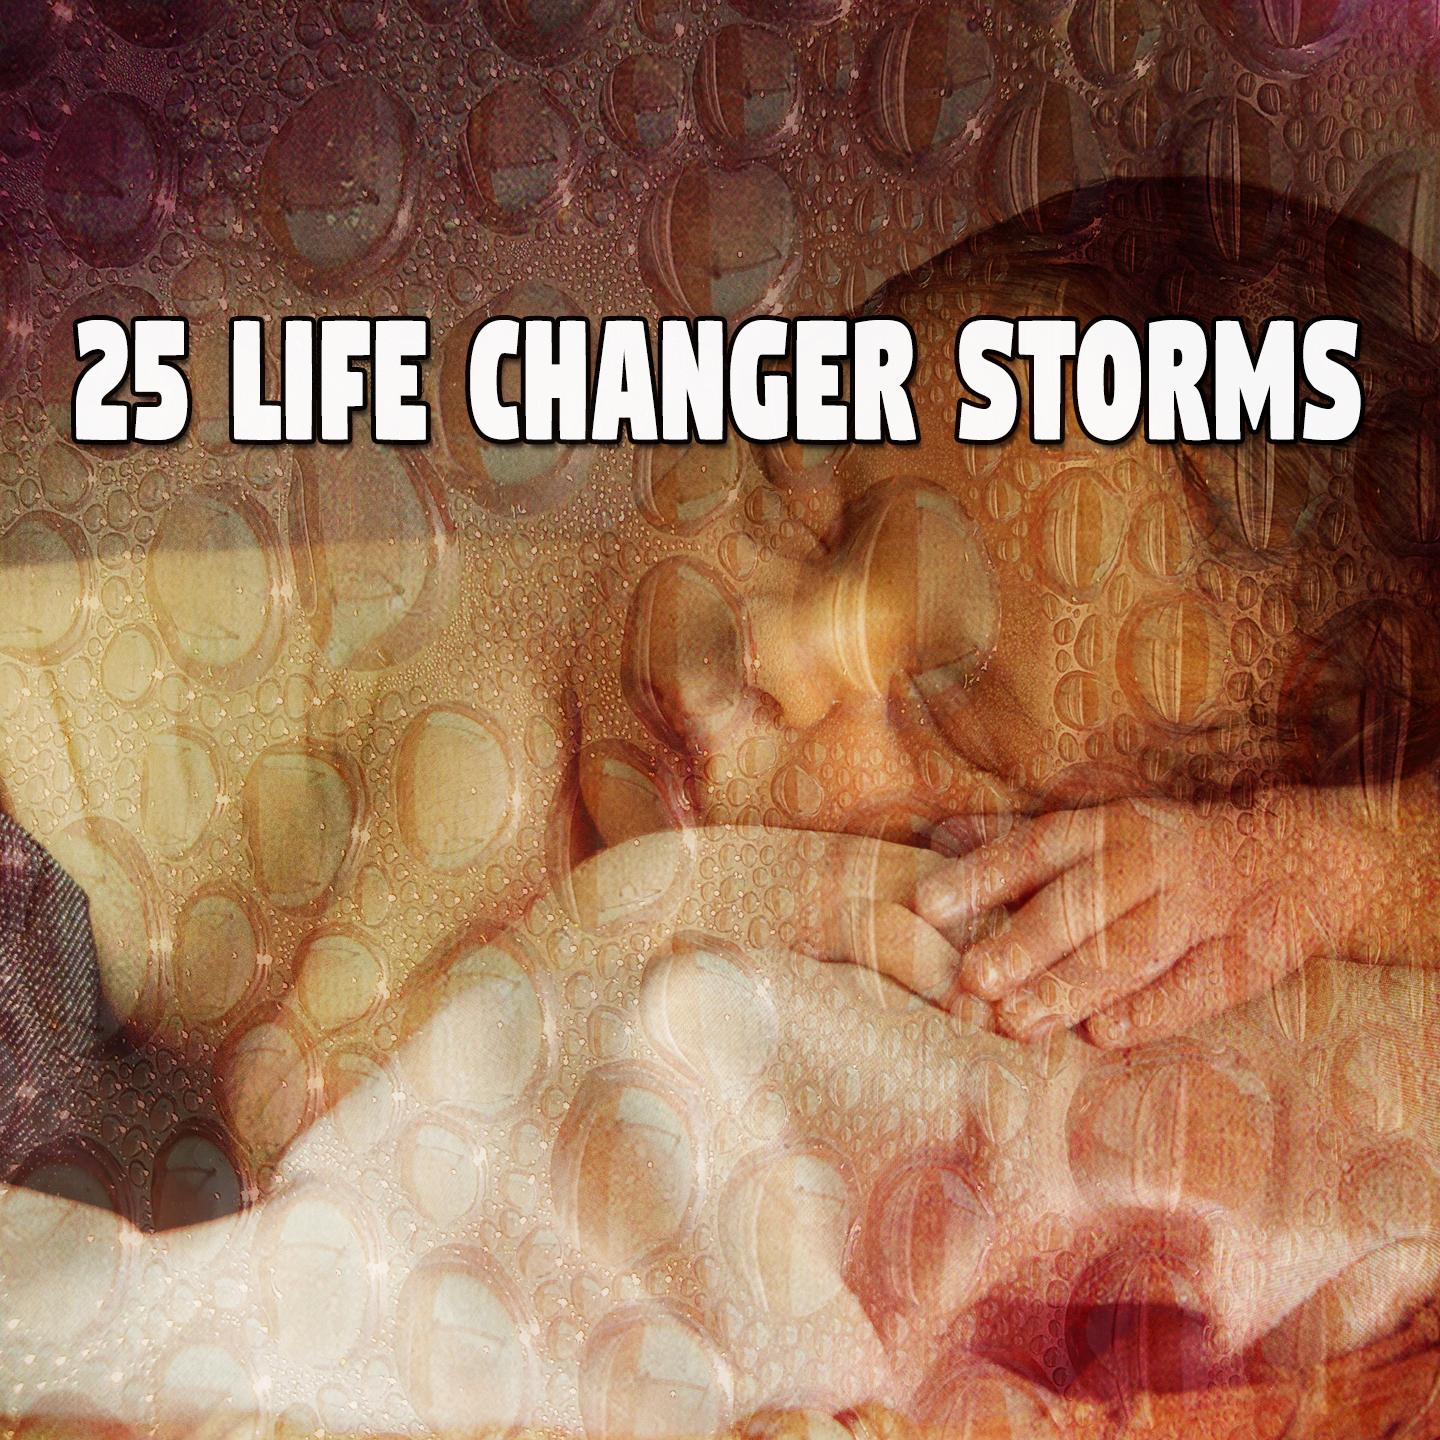 25 Life Changer Storms